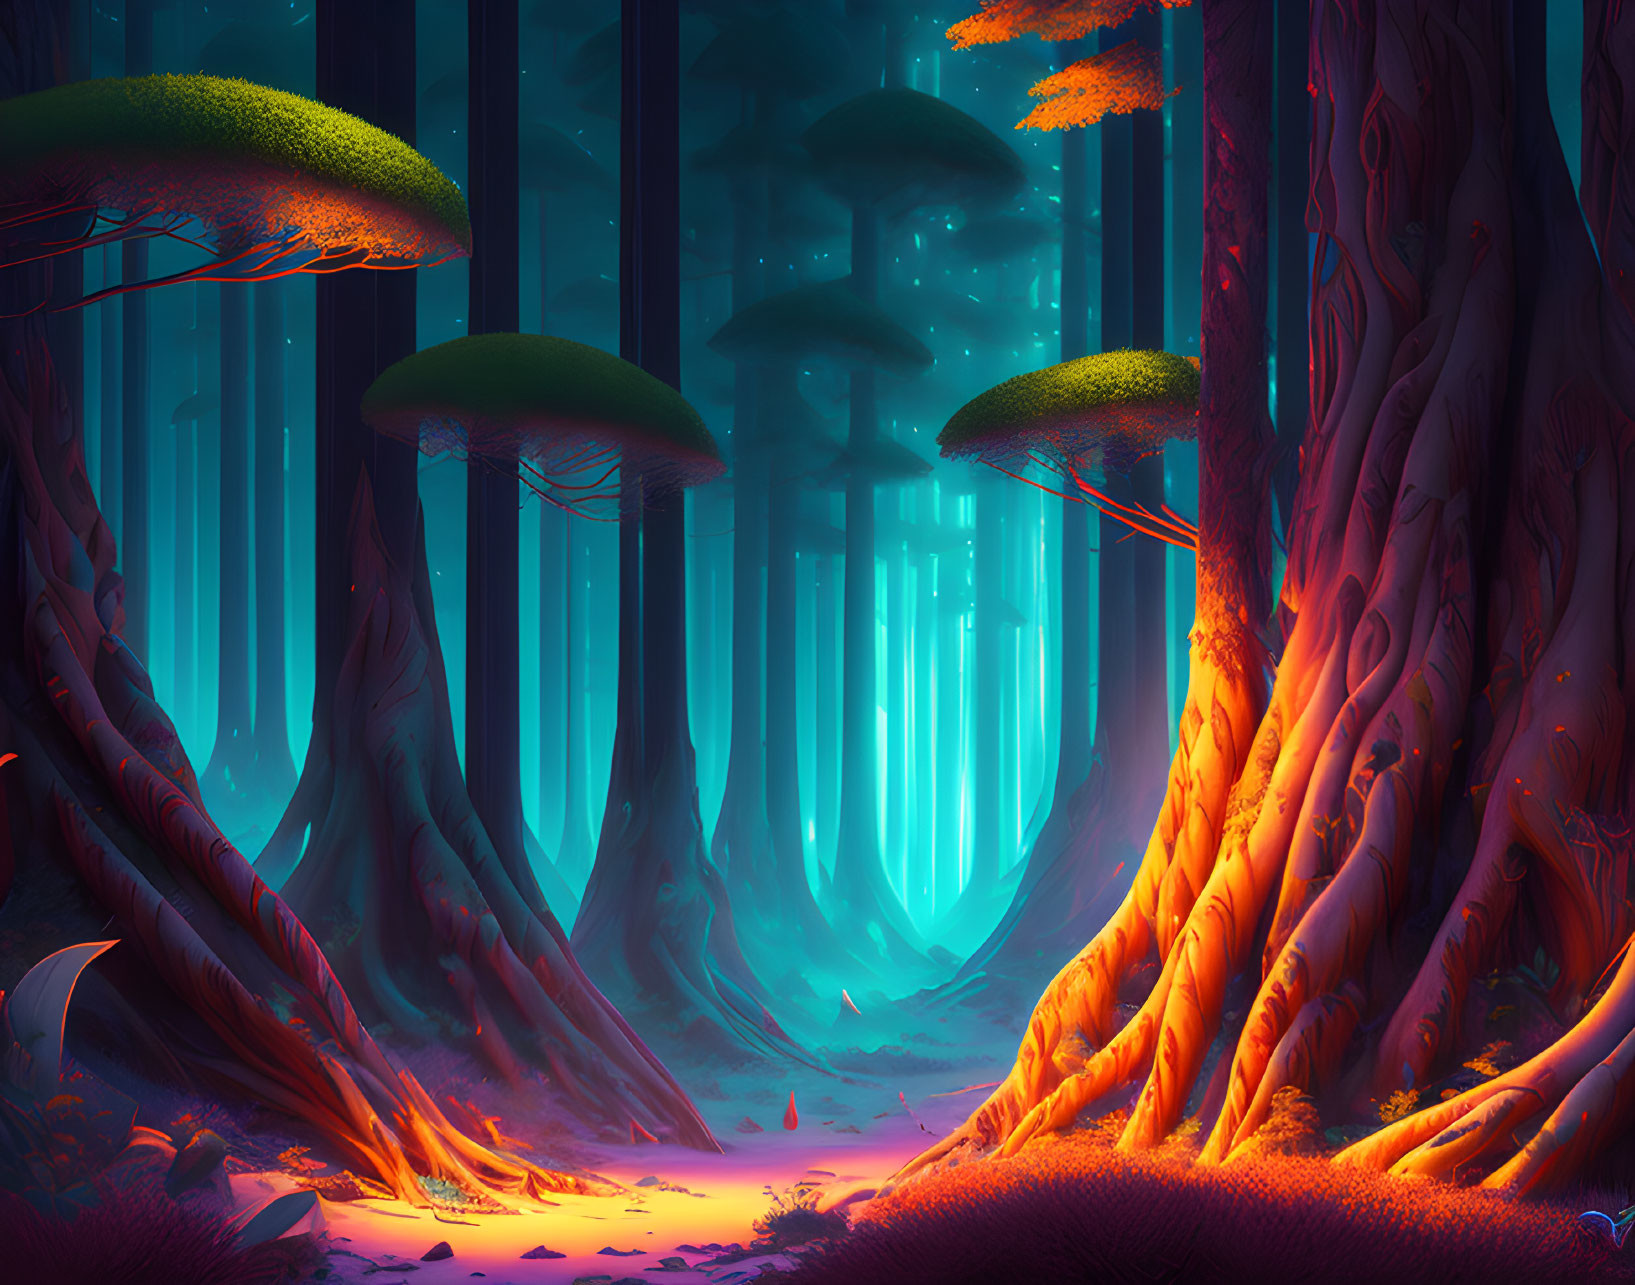 Alien forest with towering trees and bioluminescent foliage